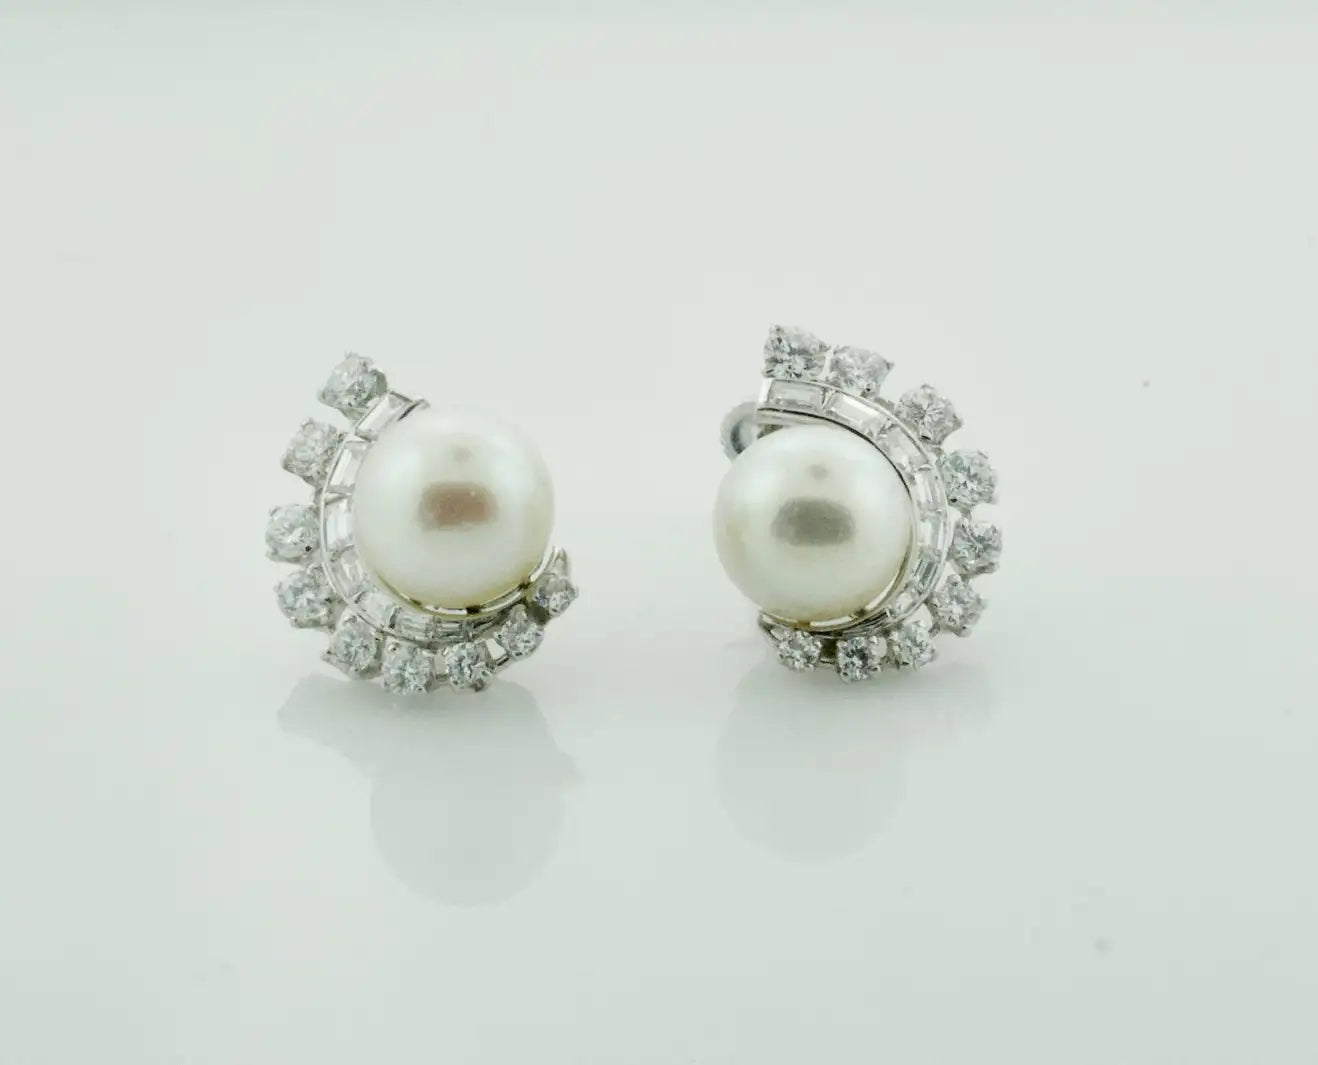 Estate Pearl and Diamond Earring in Platinum circa 1950s, 2.00 Carats